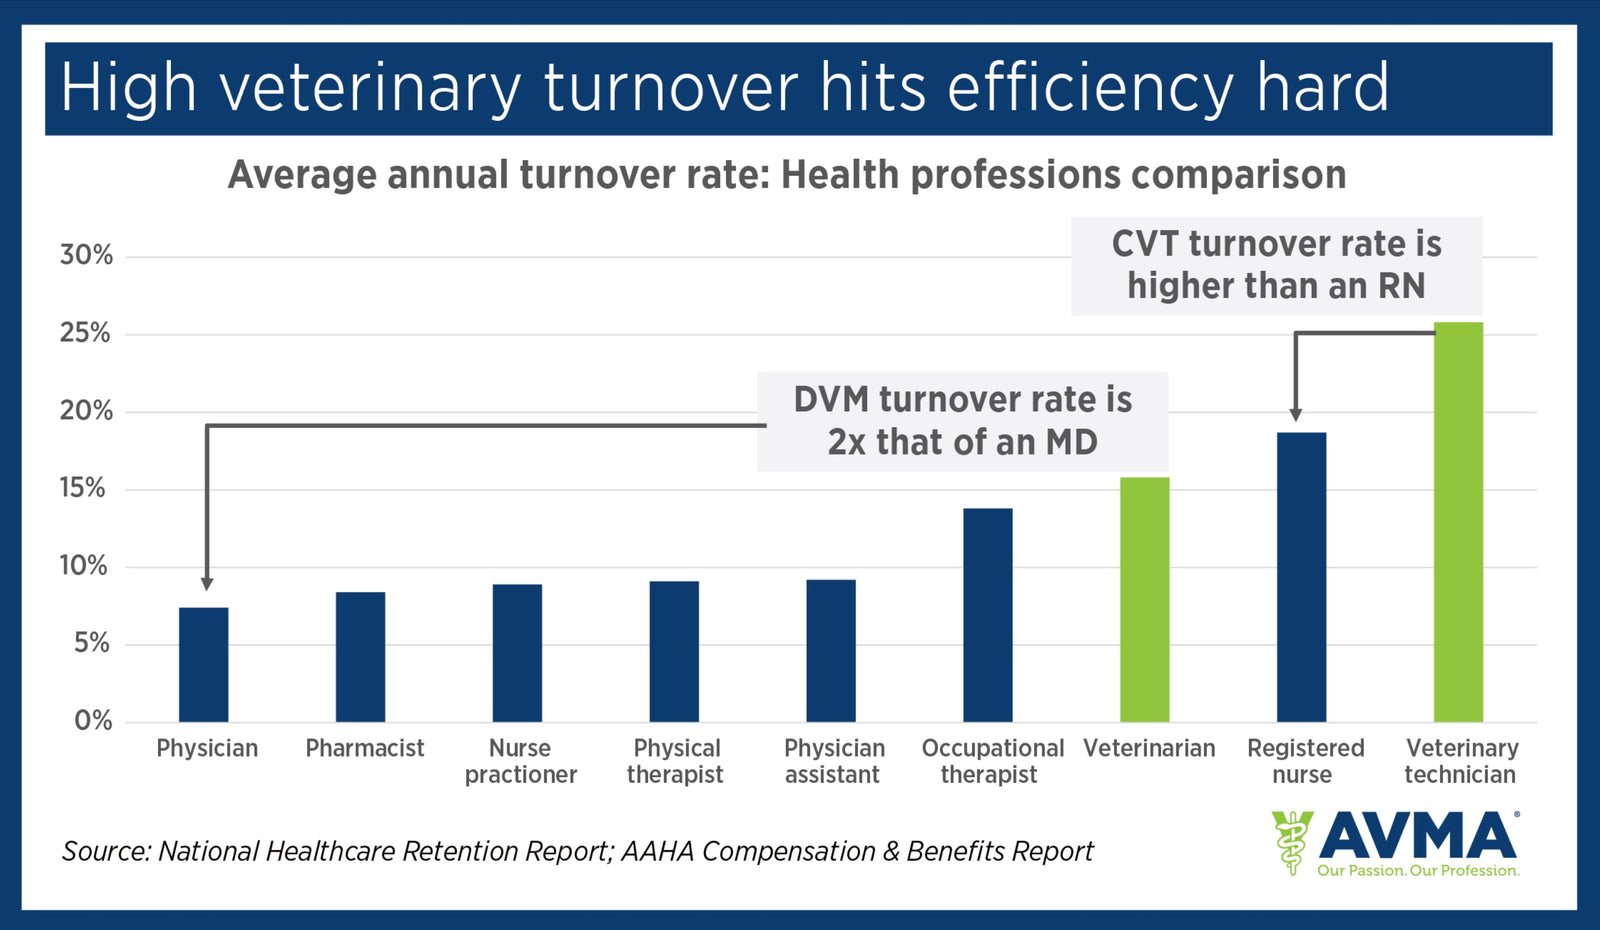 A graph from the AVMA shows that among healthcare professionals, veterinarians have twice the turnover rate of medical doctors and veterinarian technician turnover rates are higher than most any other healthcare profession.